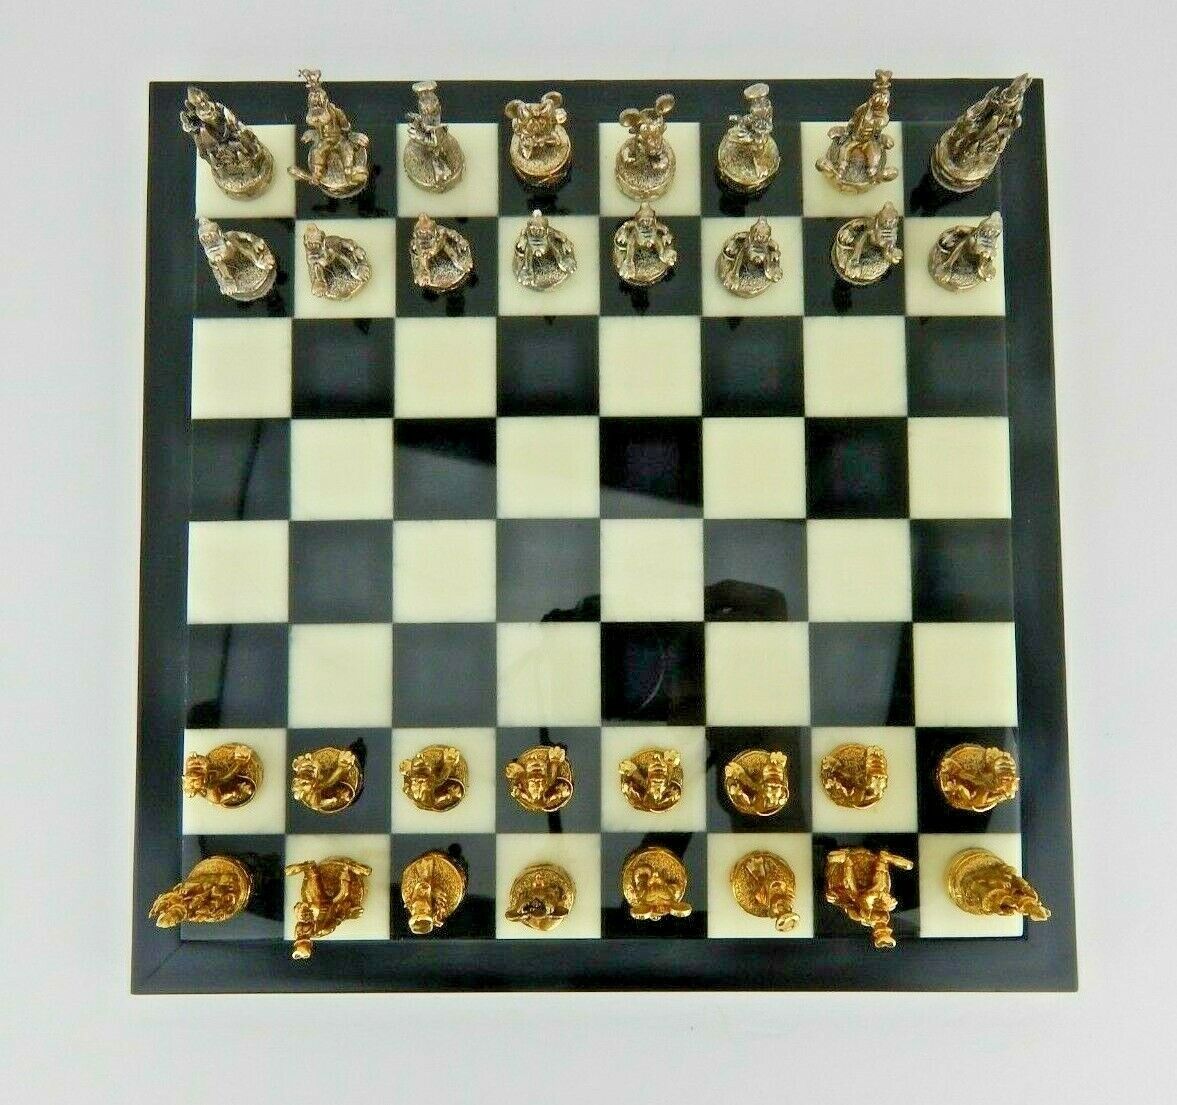 Disney Alabaster Chess Board w/32 Pewter Figures Cast in 24K Gold & Silver Plate